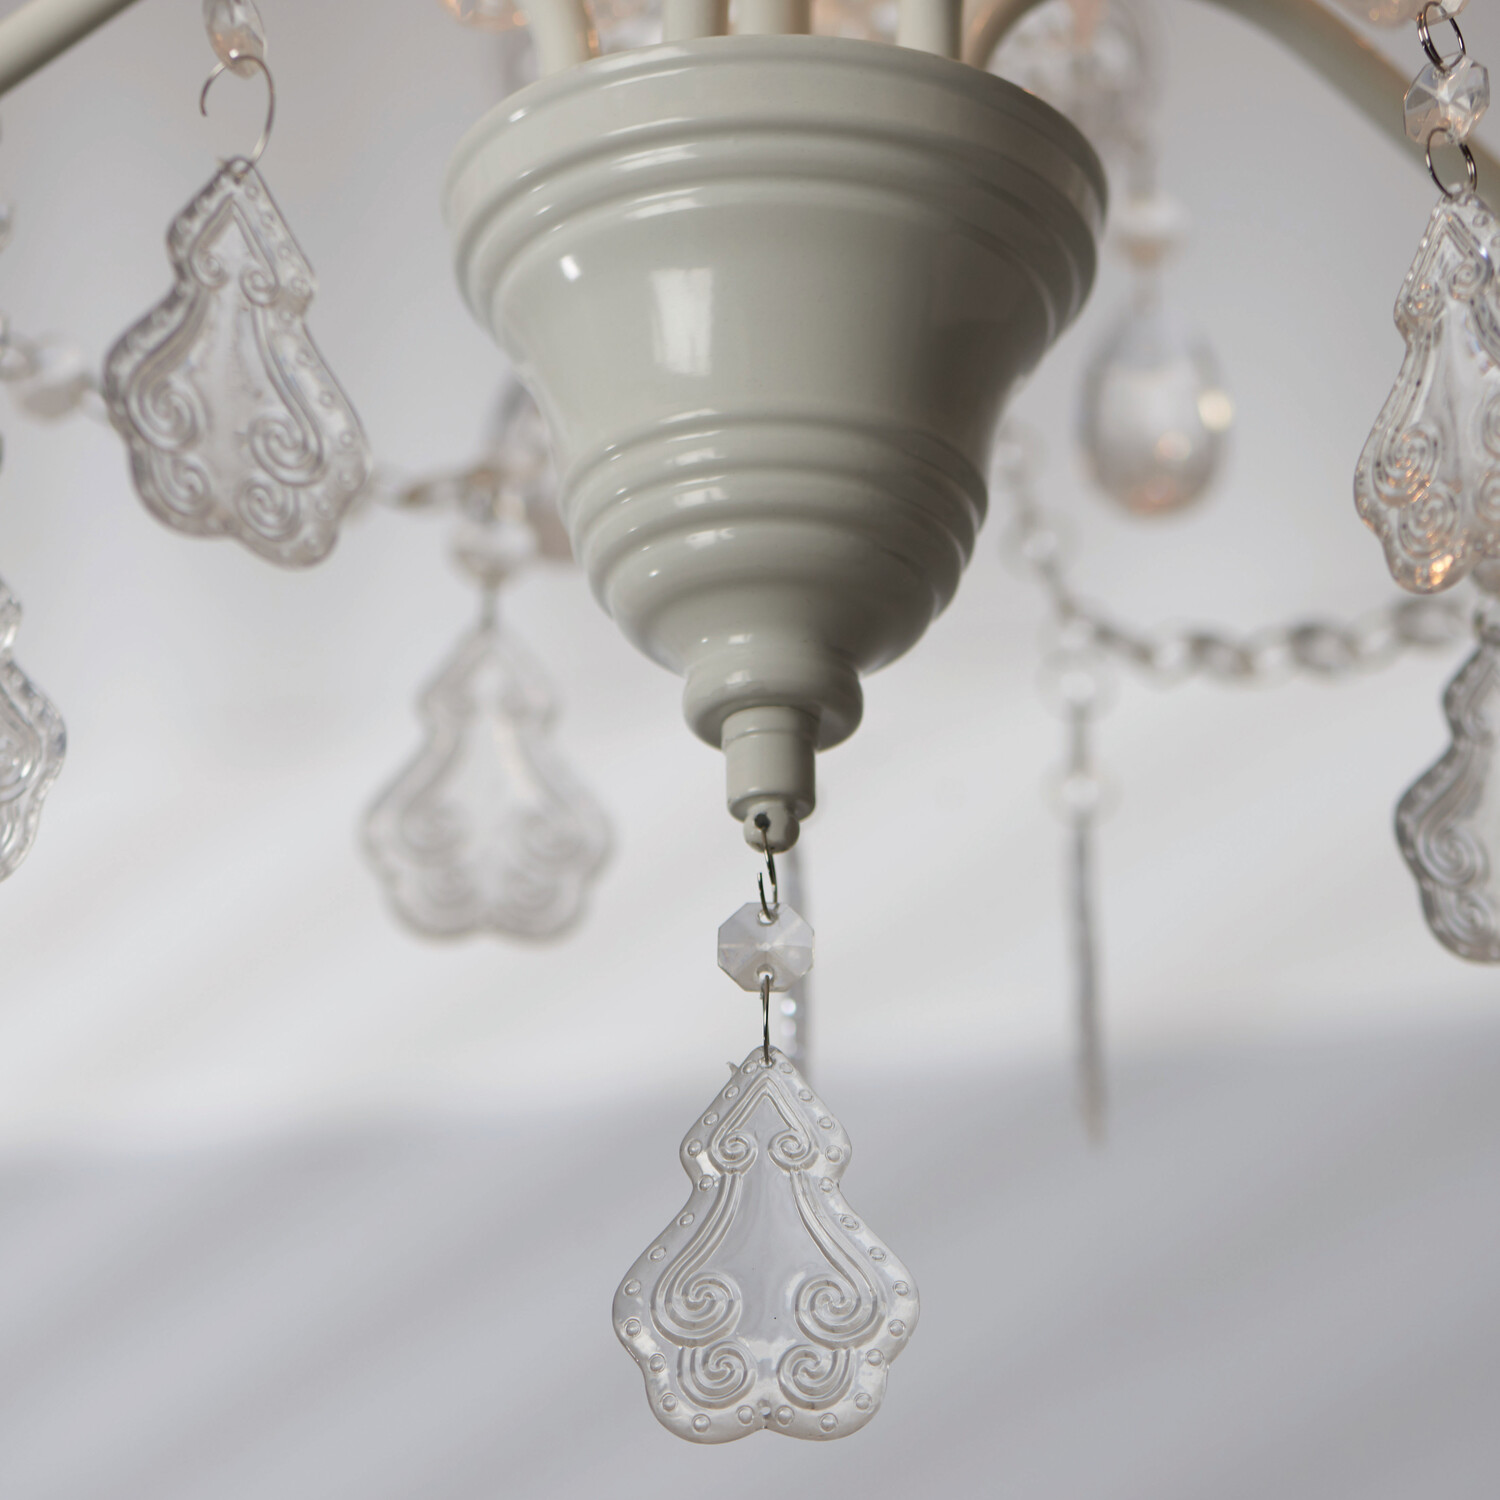 White Antiqued Jewelled Ceiling Chandelier Image 5